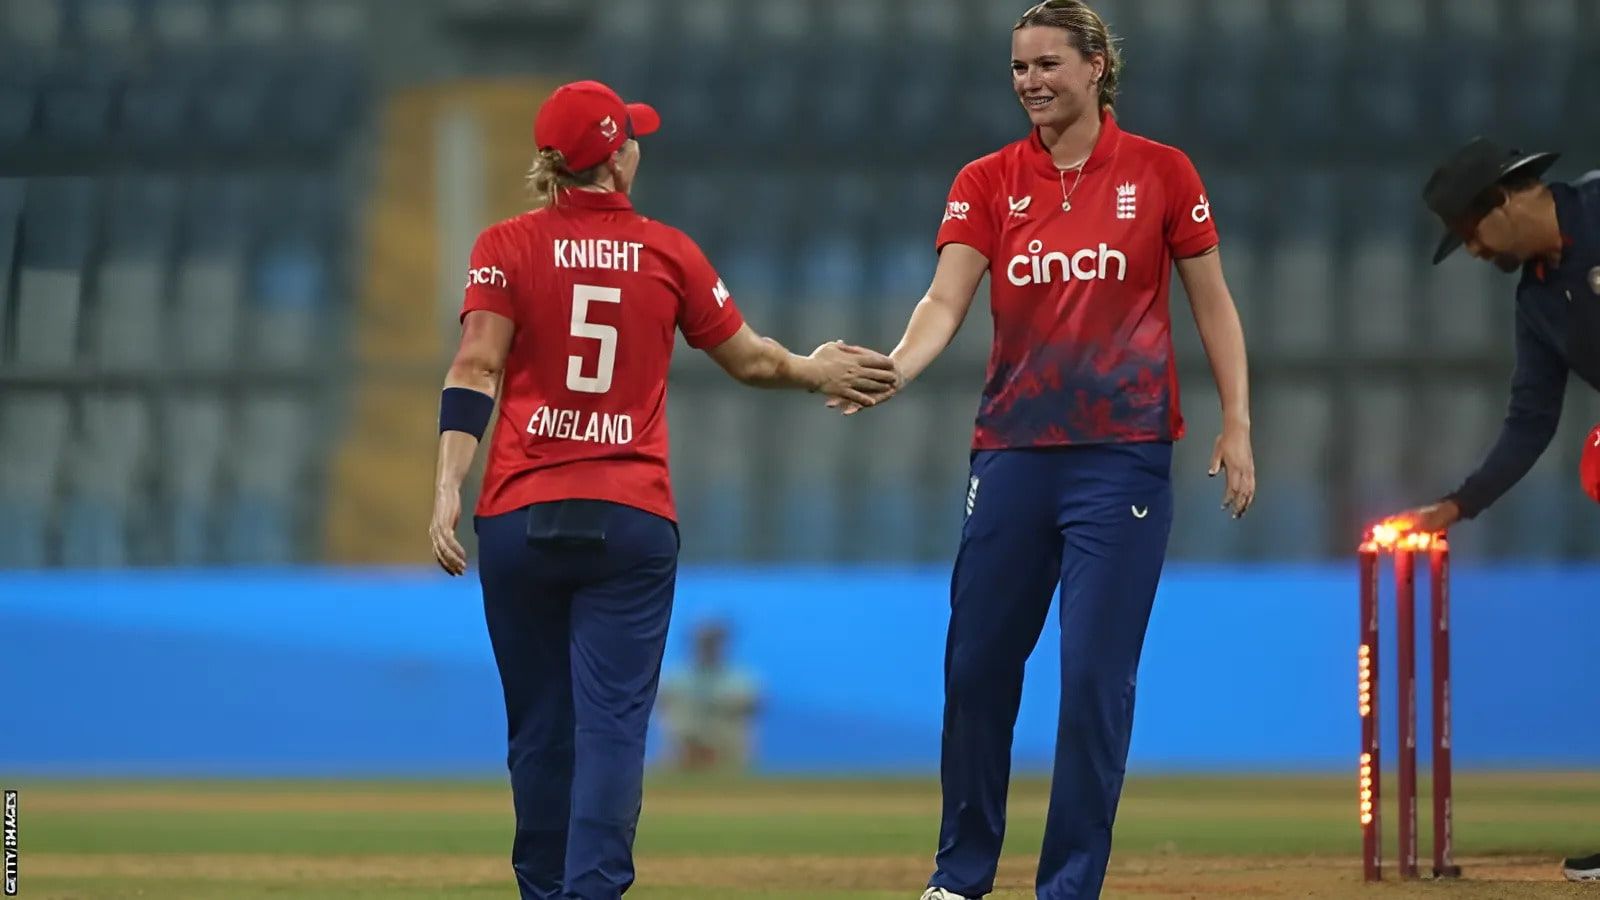 Lauren Bell talks about retiring from the WPL, taking responsibility, and inspiring England's next fast bowler